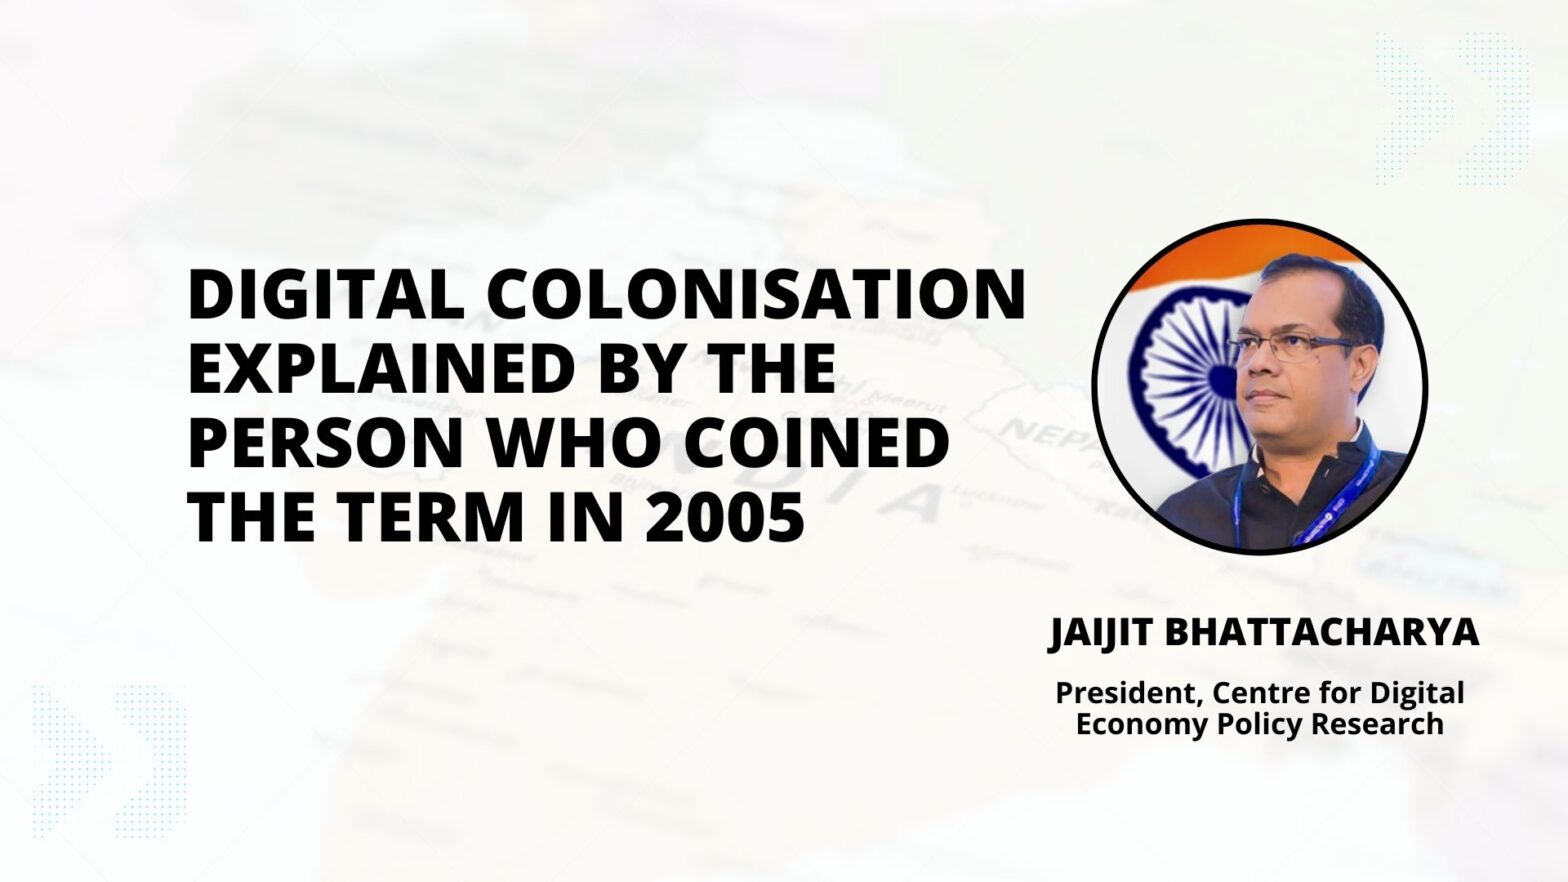 Digital Colonisation Explained by the Person Who Coined the Term in 2005